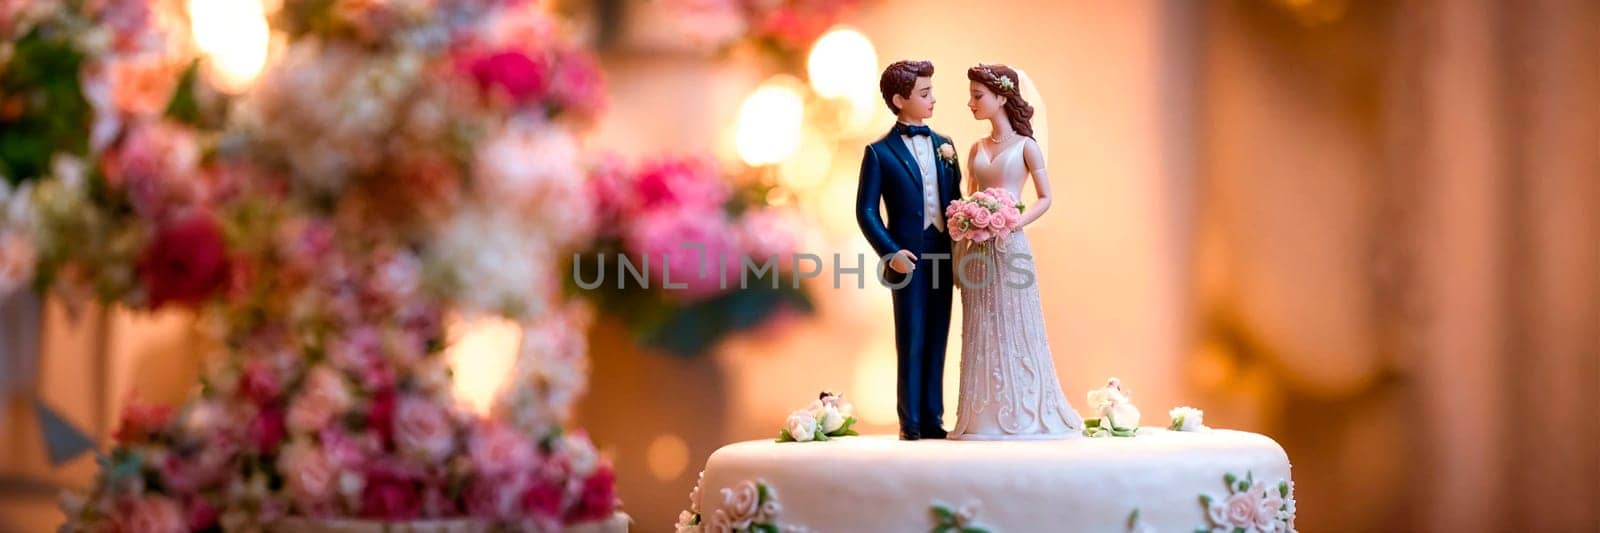 bride and groom on a wedding cake. Selective focus. food.